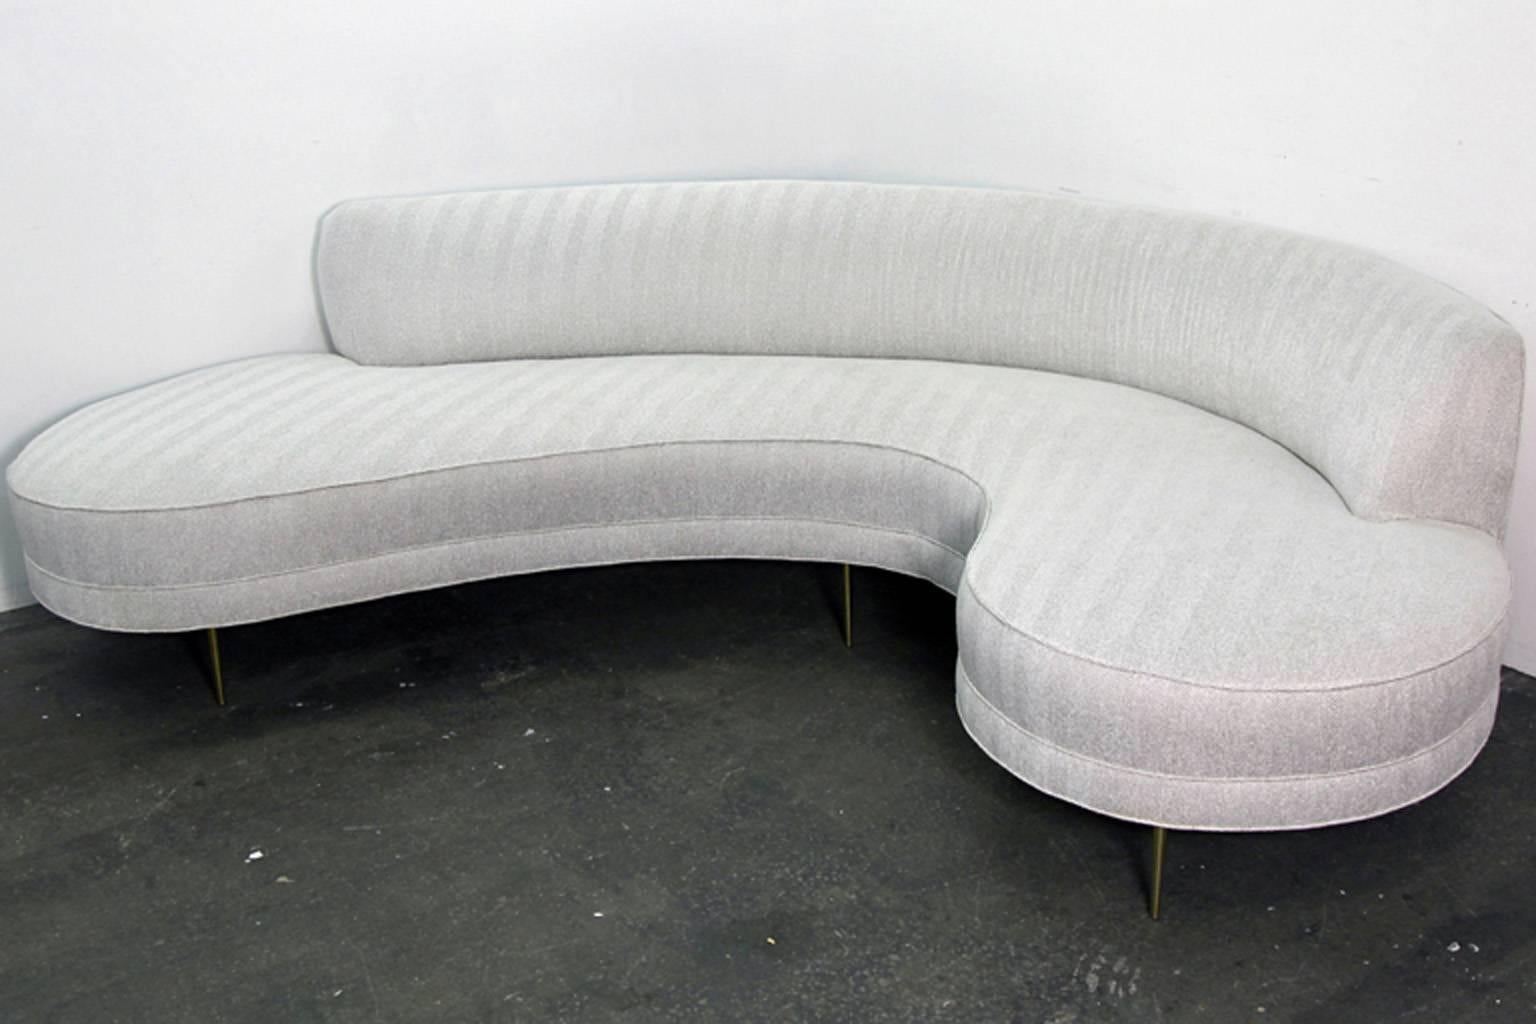 Incredible curved Mid-Century sofa originally used in famous New York City photography gallery. Could very well have been an original Valdamir Kagan, but no original tags or labels existed. The sofa has been completely re-upholstered in woven